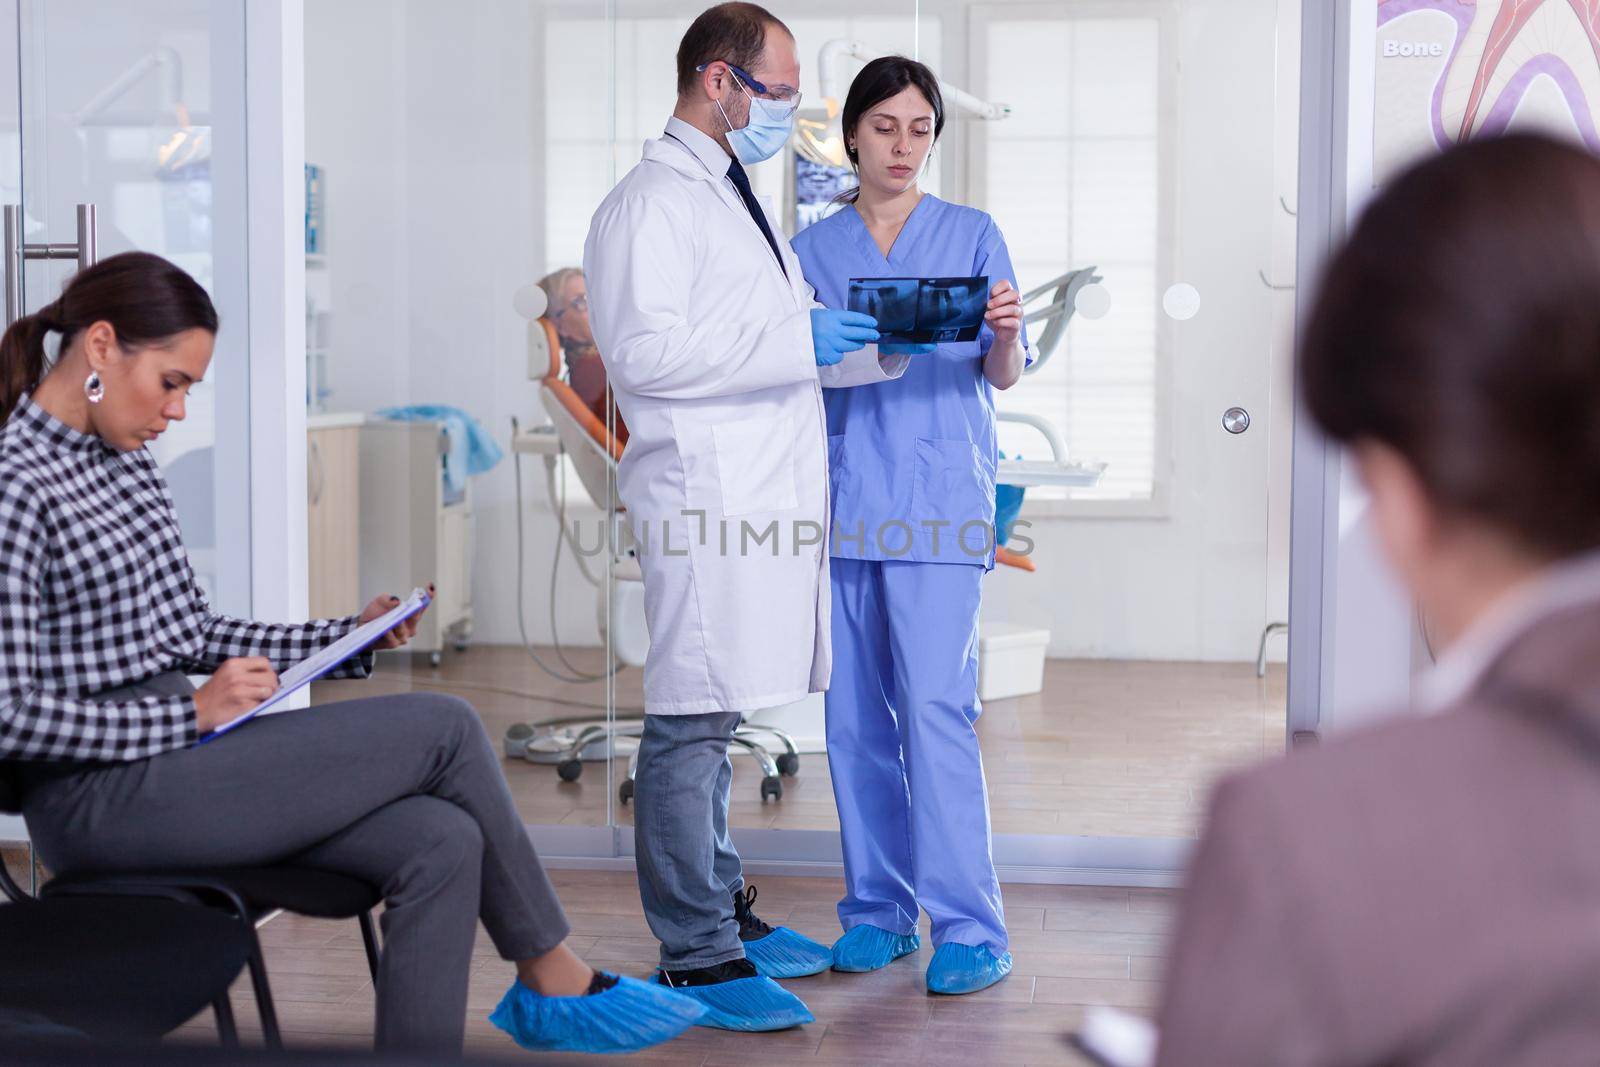 Dentist in stomatology waiting area holding patient x-ray explaining diagnosis to nurse in a crowded hallway with patient filling form. Dentistiry staff in reception.